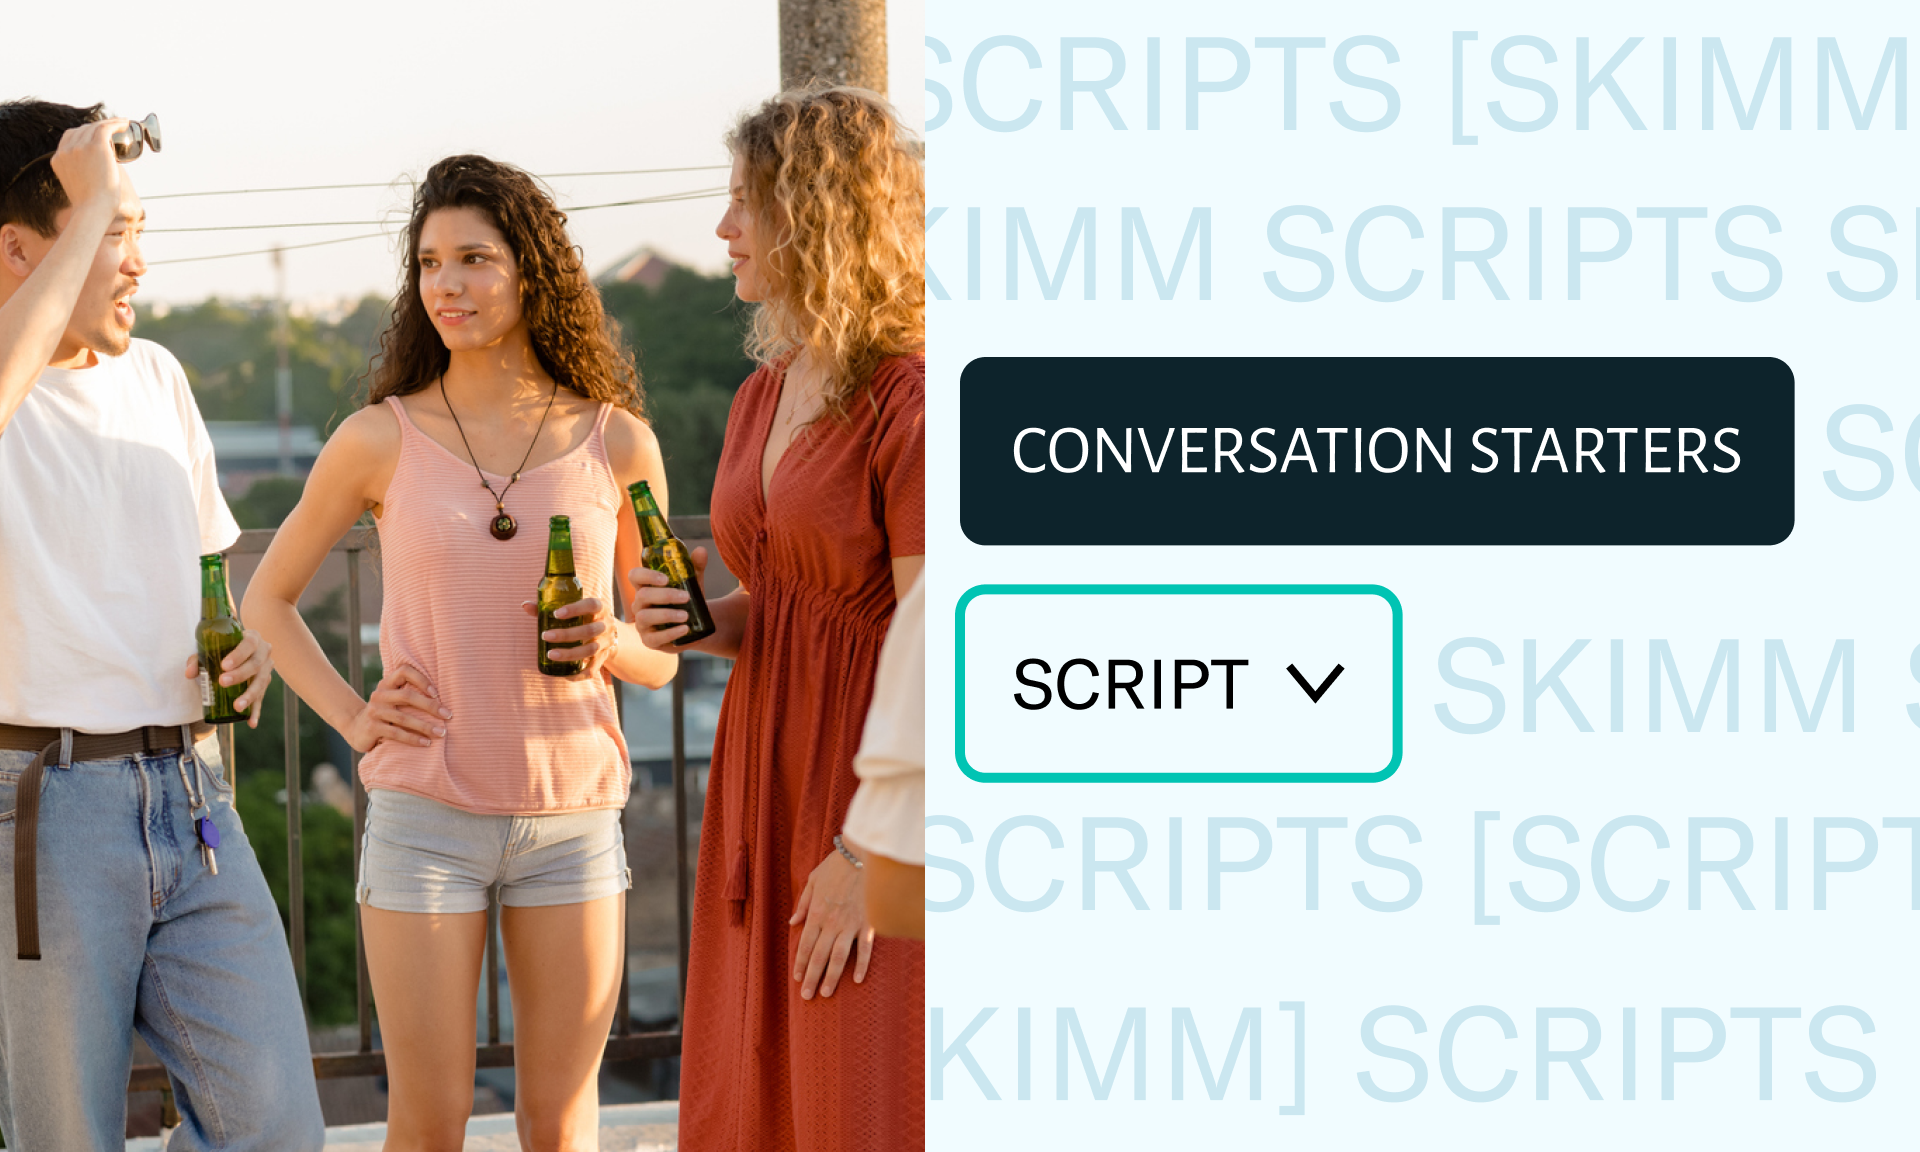 On the left: Three people talking and standing. On the right: text that says "conversation starters, script"